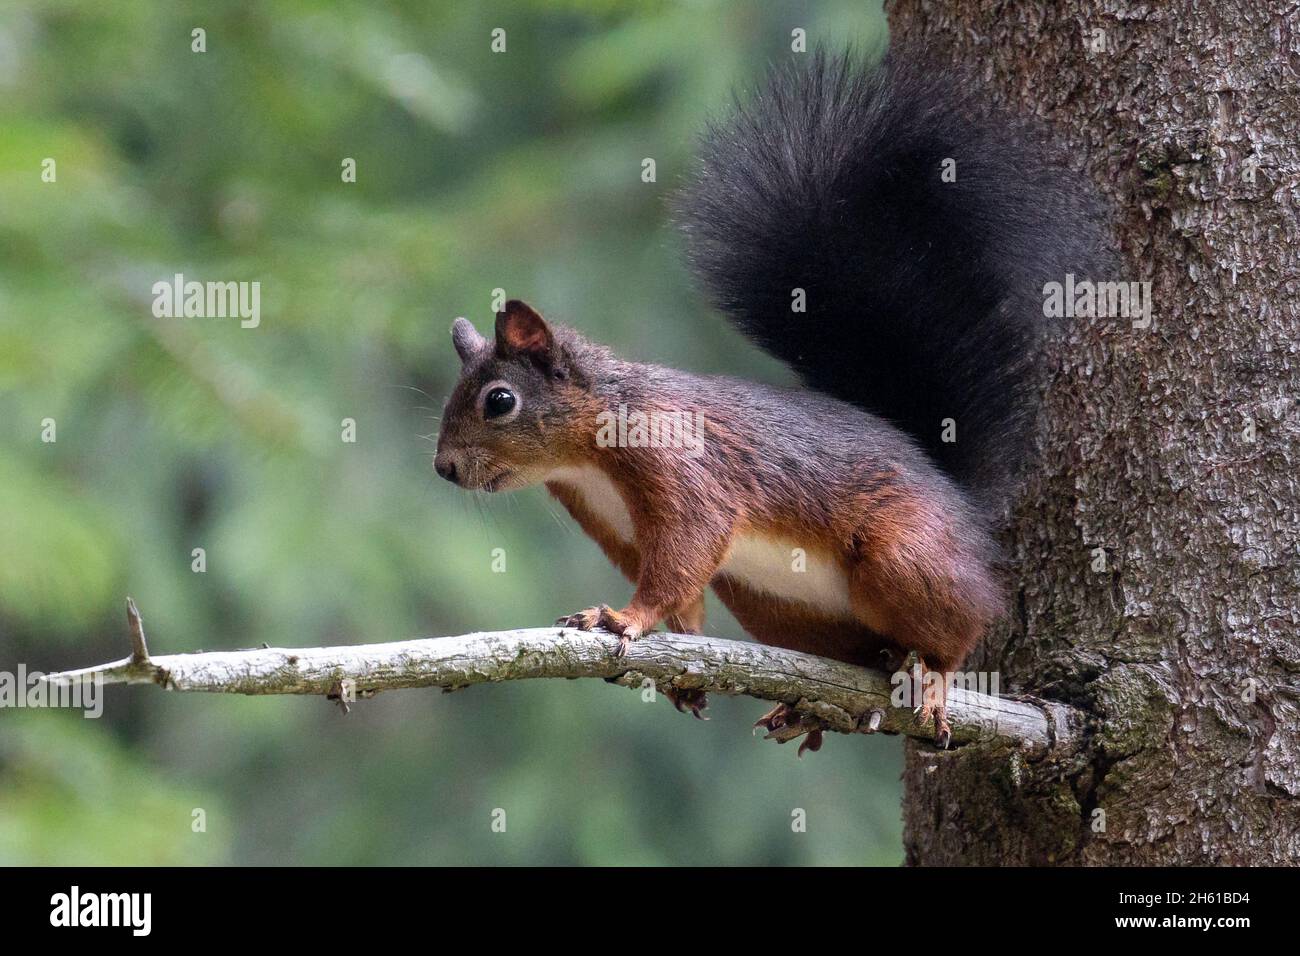 Squirrel in the branches of a tree. Stock Photo